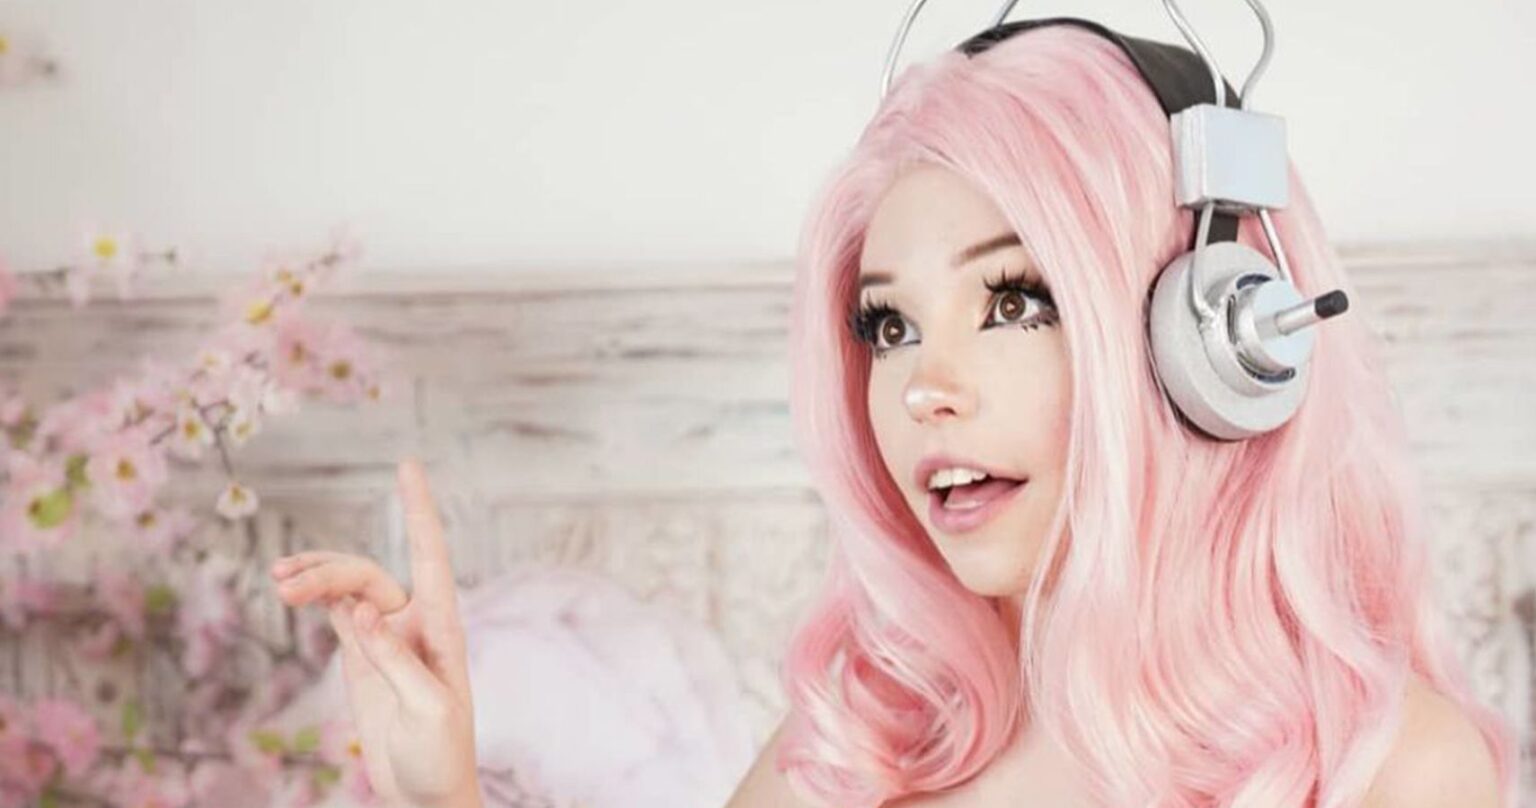 Want to learn more about the controversial social media star? What’s Belle Delphine’s age? Here's everything you need to know.